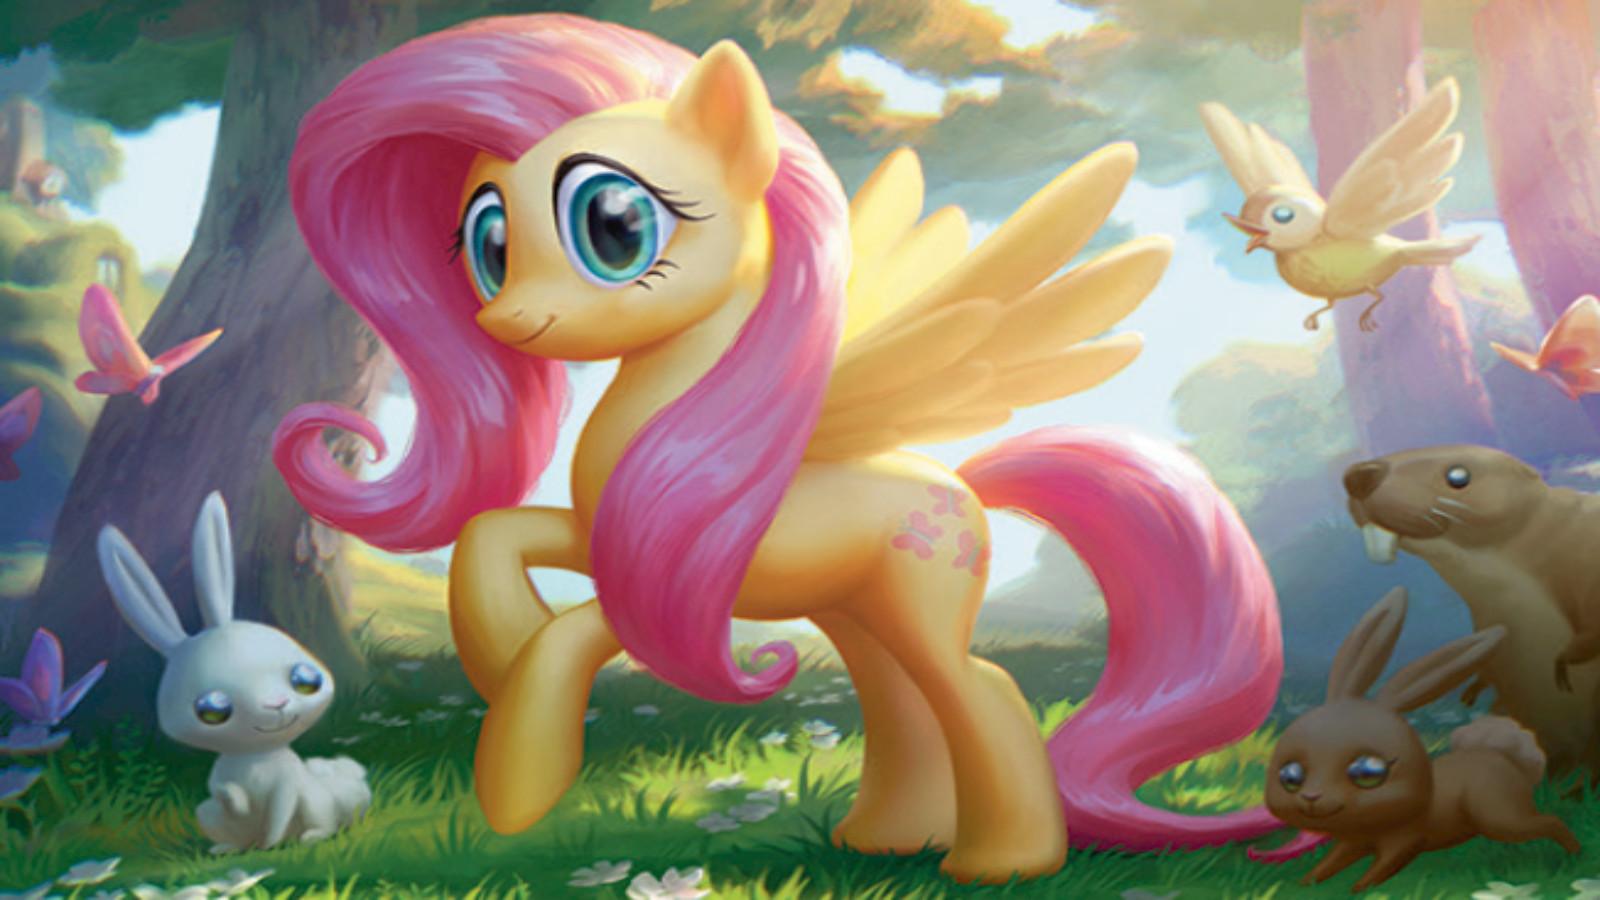 MTG My Little pony Charity Set - Fluttershy and forest friends